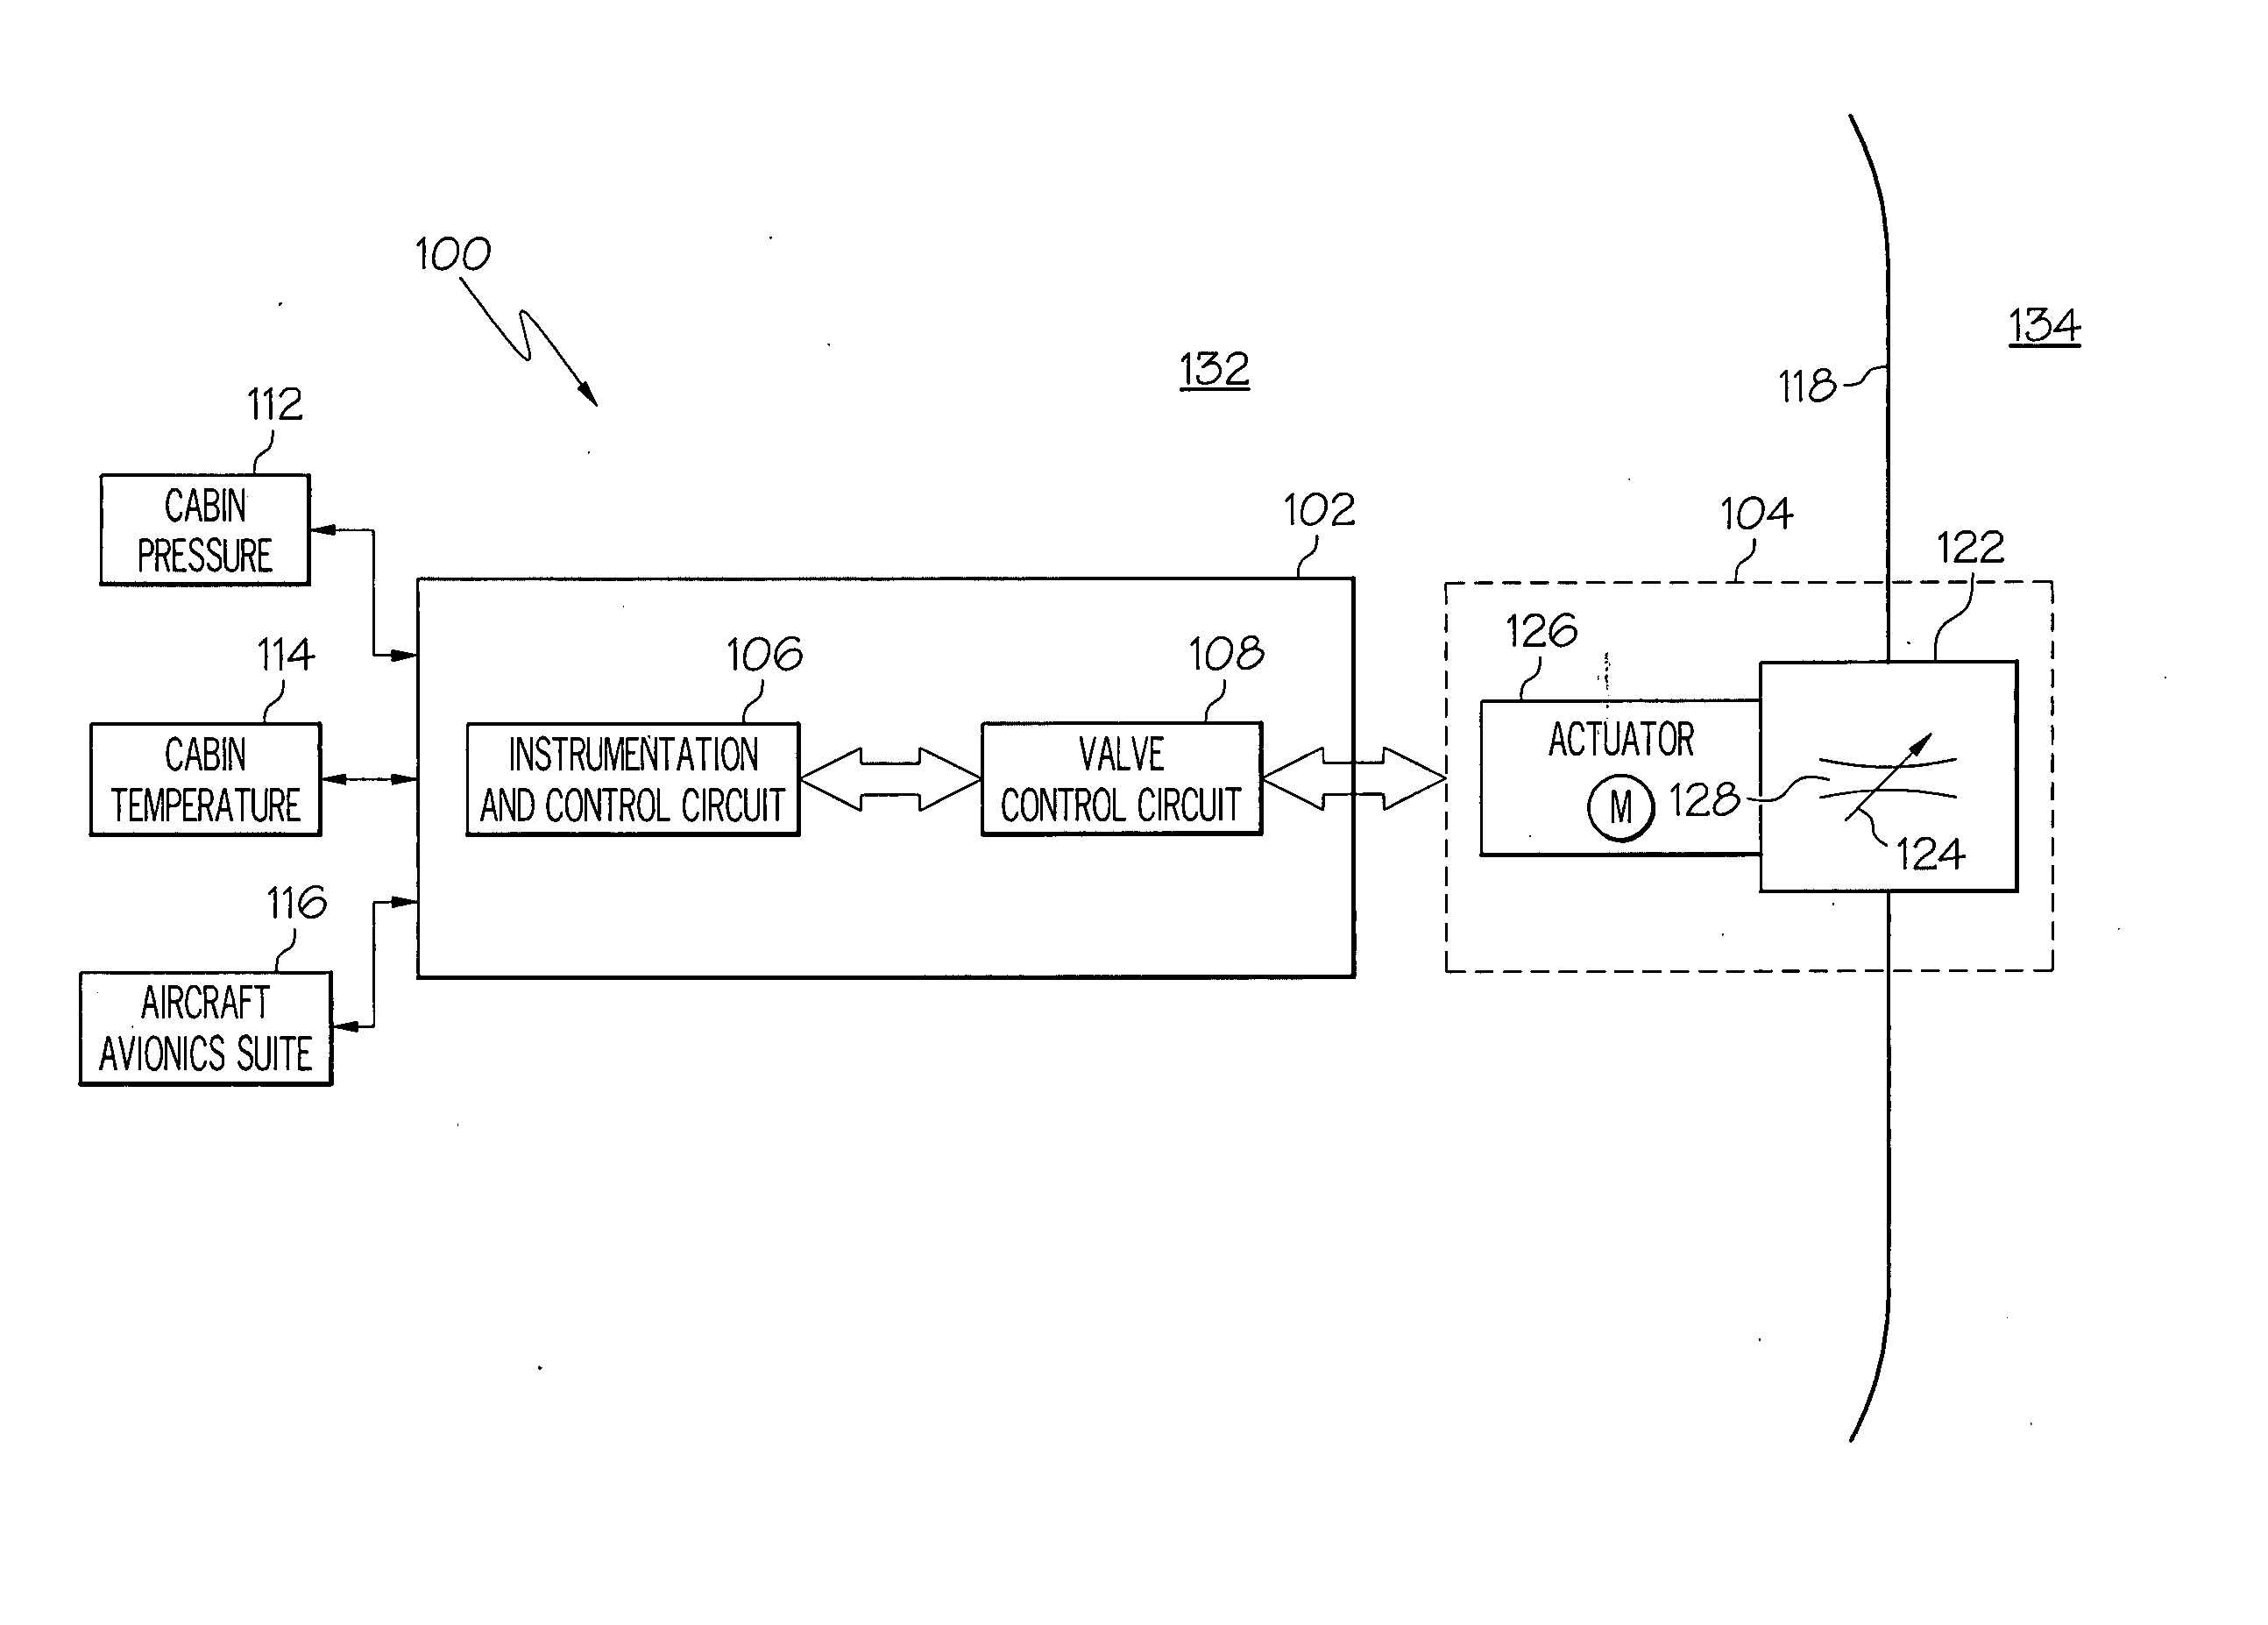 Cabin pressure control system and method that implements high-speed sampling and averaging techniques to compute cabin pressure rate of change